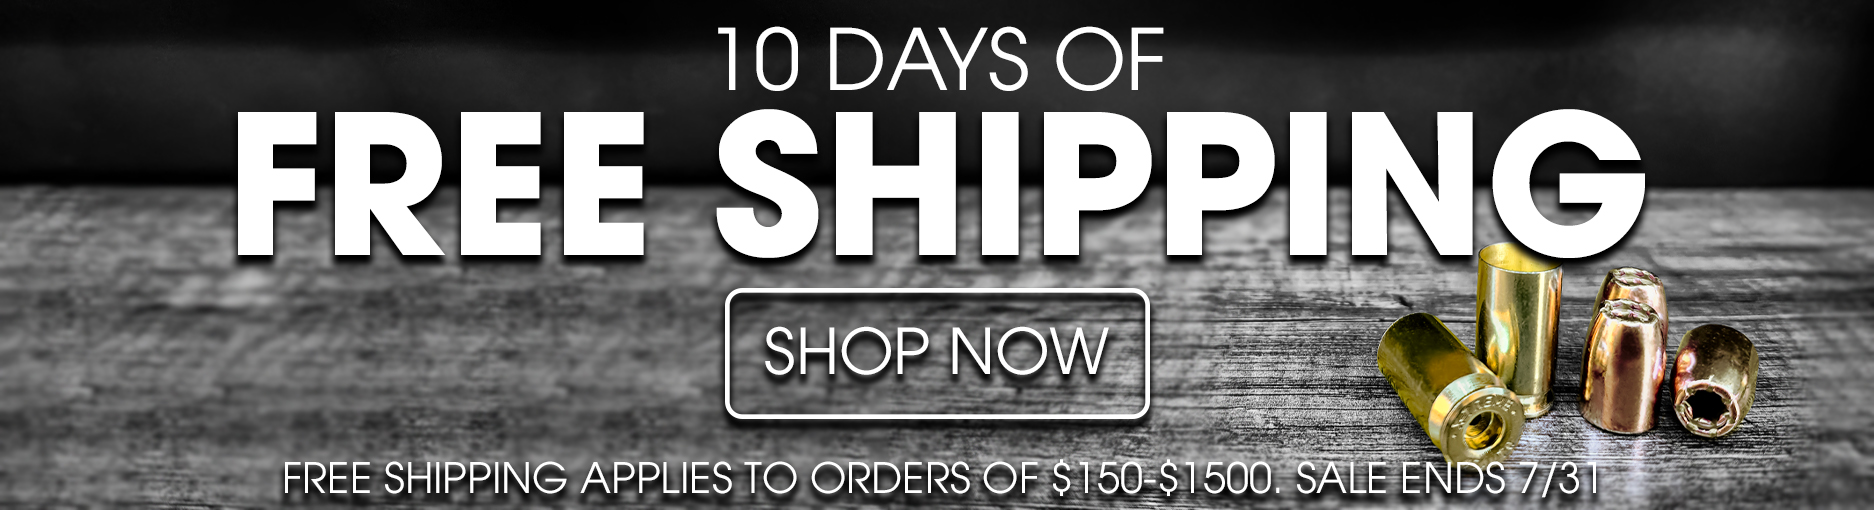 10 Days of Free Shipping